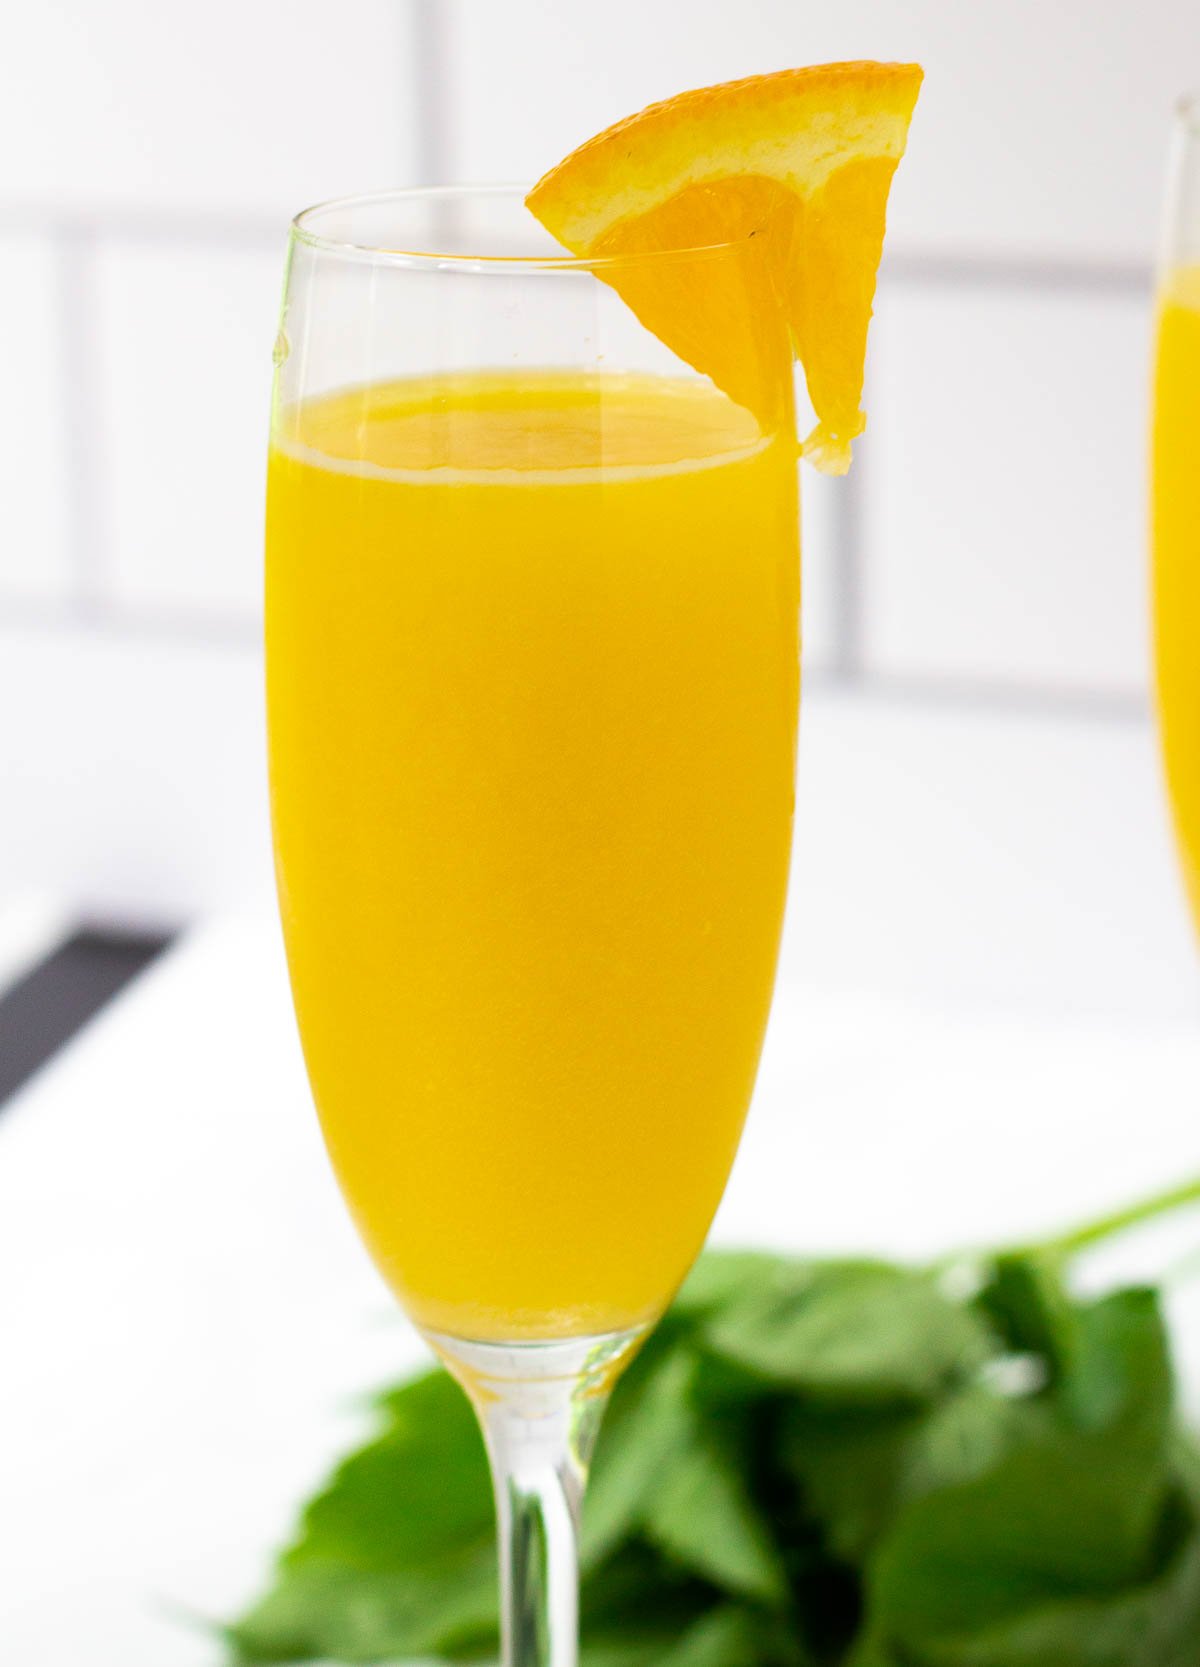 Champagne flute filled with a orange juice and sparkling water, and garnished with a wedge of orange.